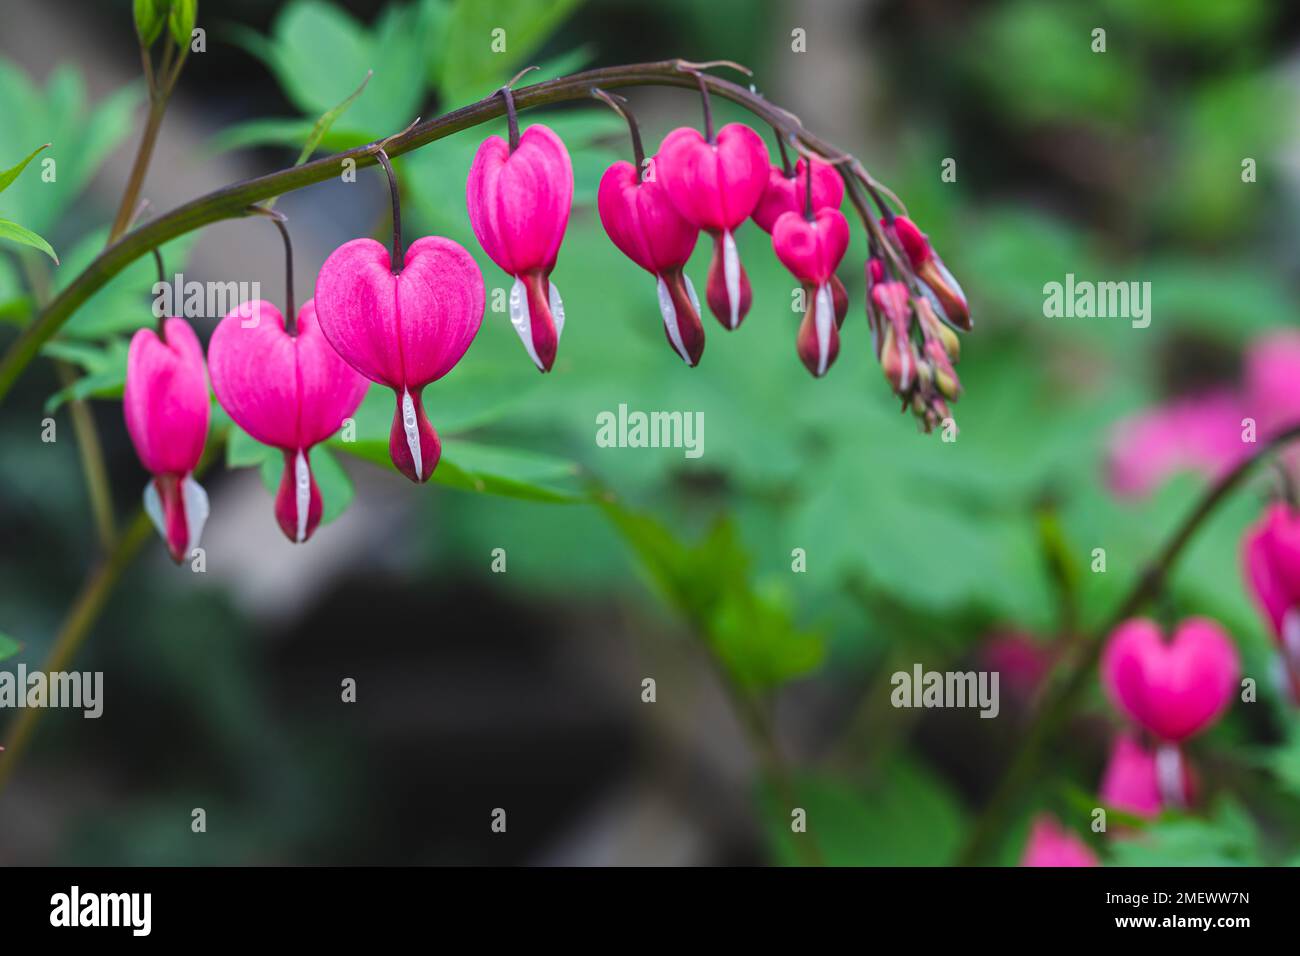 Dicentra spectabilis (Lamprocapnos) - bleeding heart. Asian bleeding-heart. Dicentra formosa blooming in the garden, Nature floral background. Stock Photo